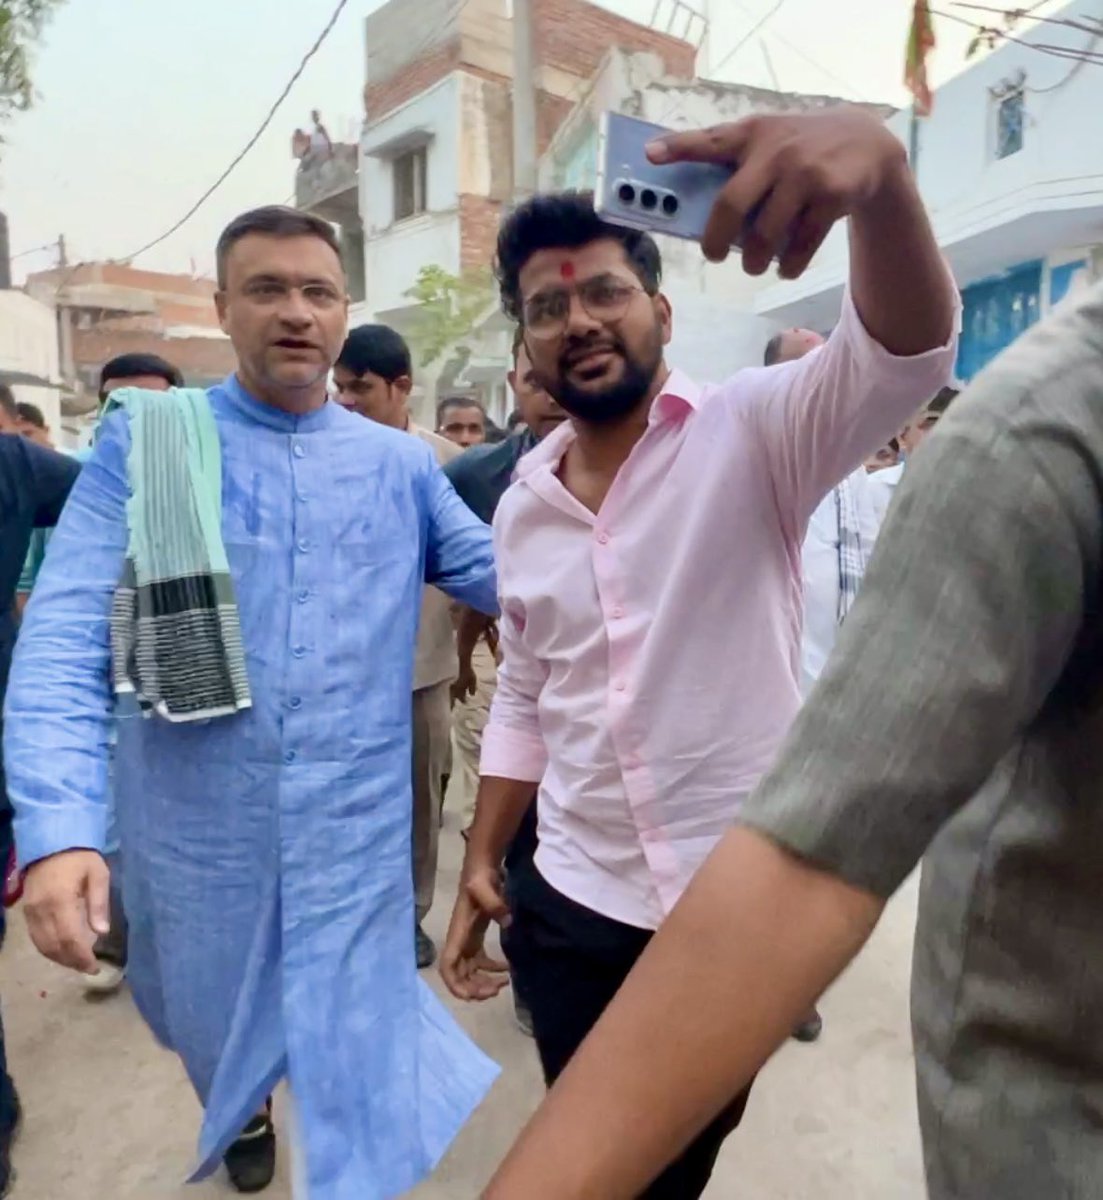 With #Bahadurpura MLA Janab Mohd Mubeen Campaigned For Barrister #AsaduddinOwaisi ( #Hyderabad #MP Candidate) Today In Various Areas Of Madina Colony, #Vattepally and Surrounding Areas Of #Bahadurpura Constituency & Urged #Voters To #Vote For #AIMIM🪁

#Vote4Kite🪁 #Elections2024